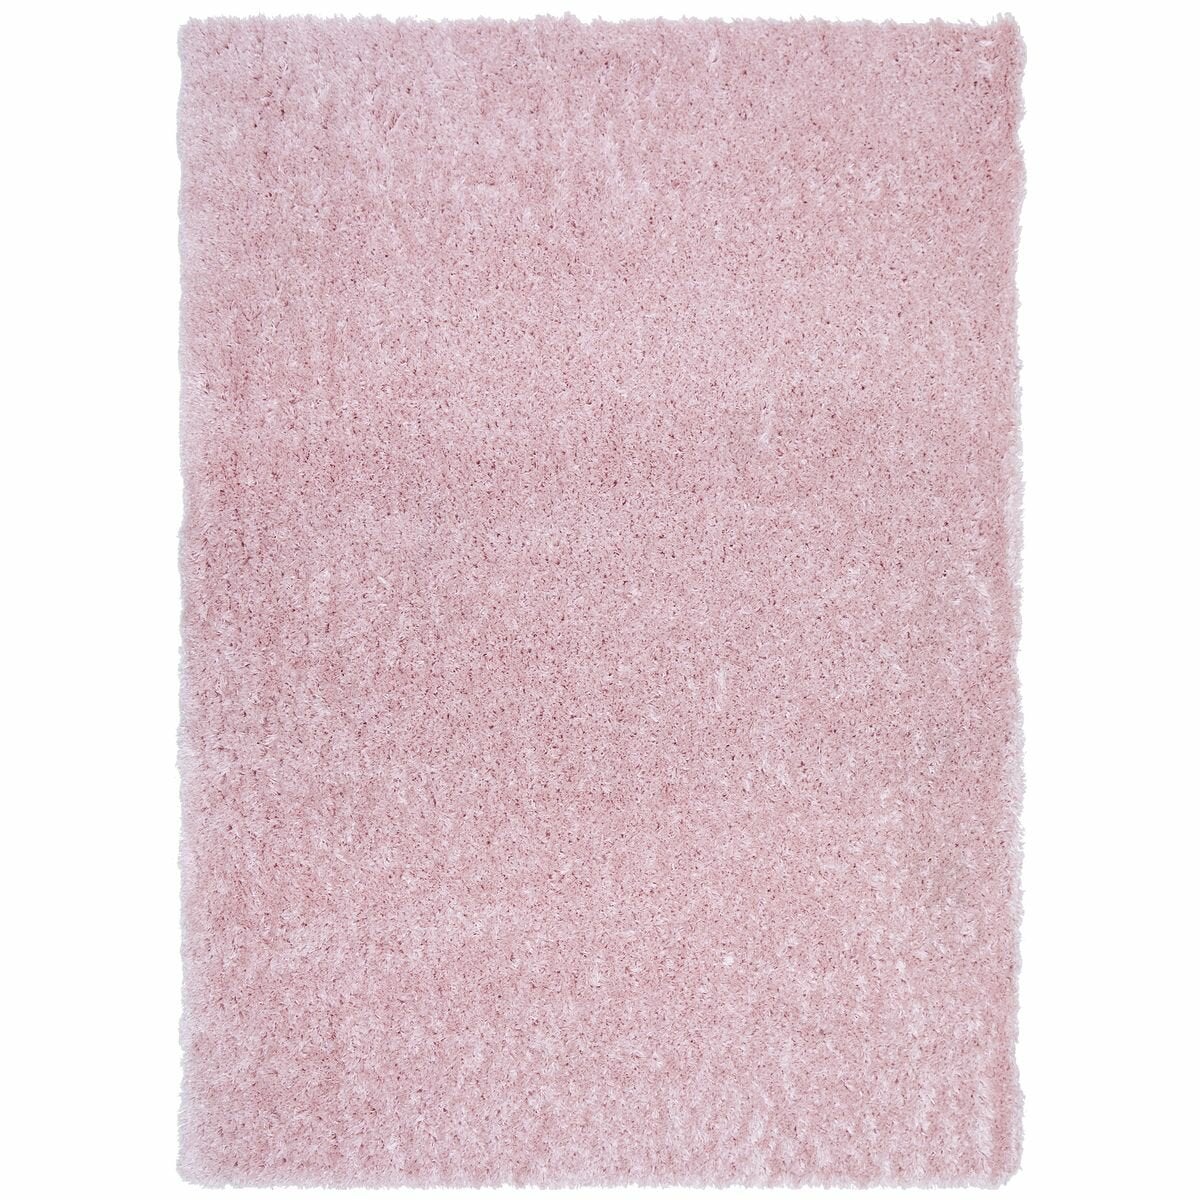 Image of Rug Culture Angel Extra Large Rug 330x240 Pink ANG-PINK-330240